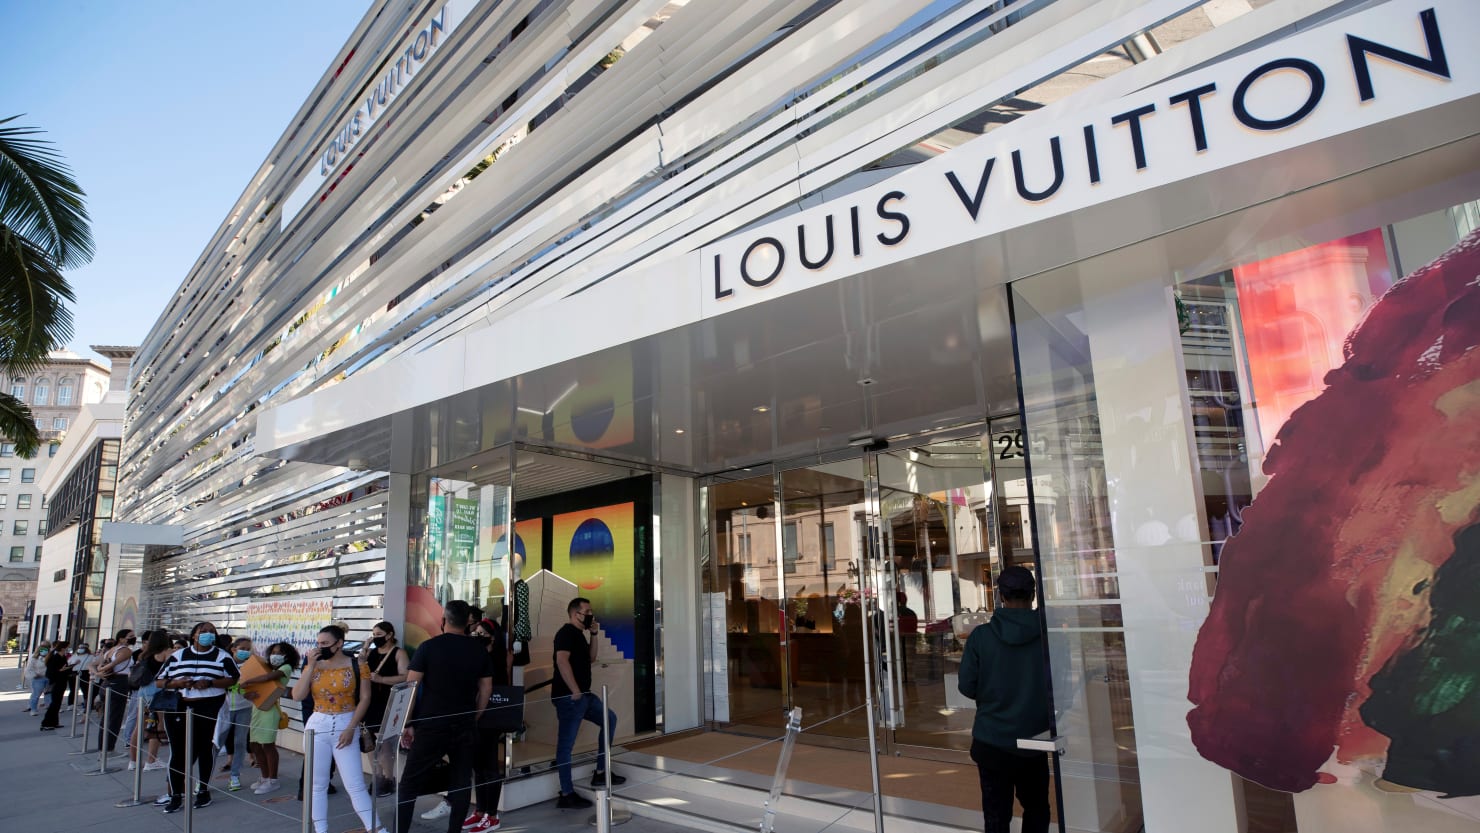 Planned Louis Vuitton Luxury Hotel in Beverly Hills Is a No-Go